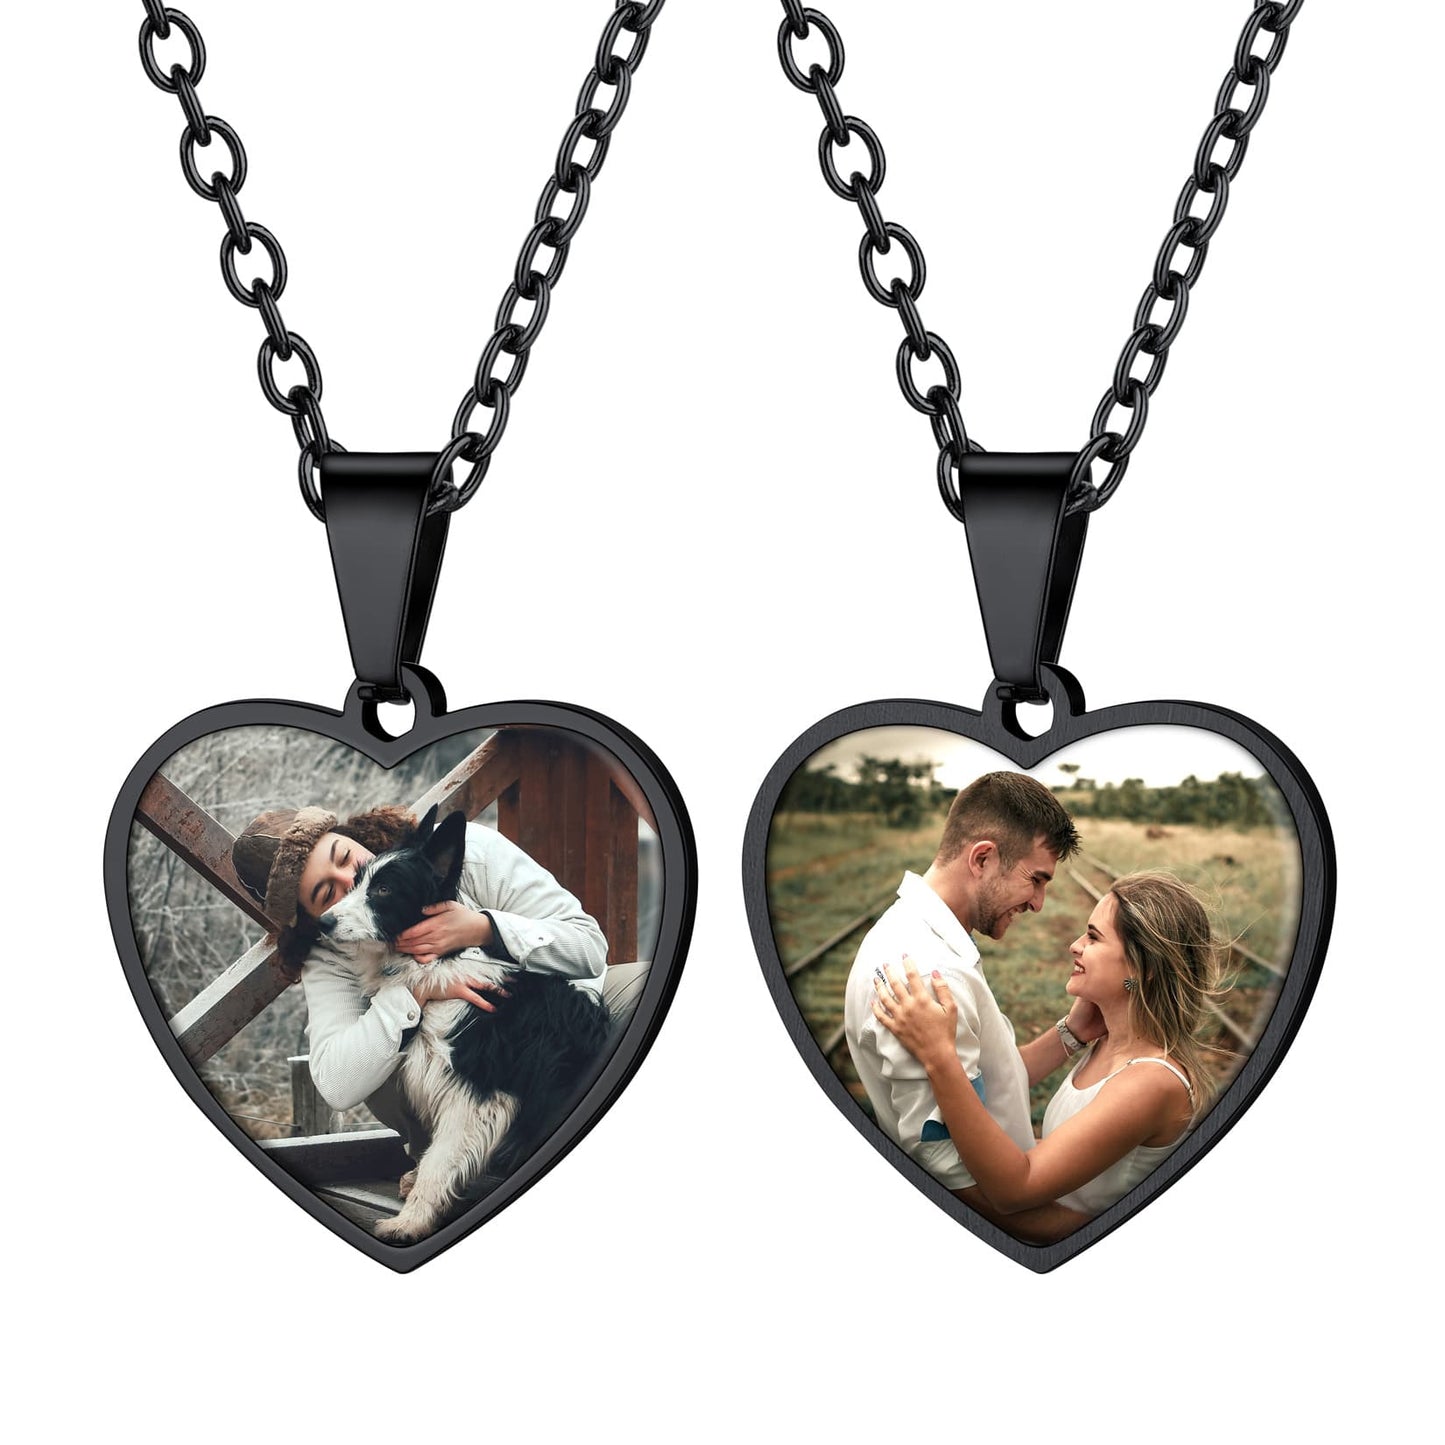 Birthstonesjewelry Personalized Heart Double Sided Picture Necklace Black